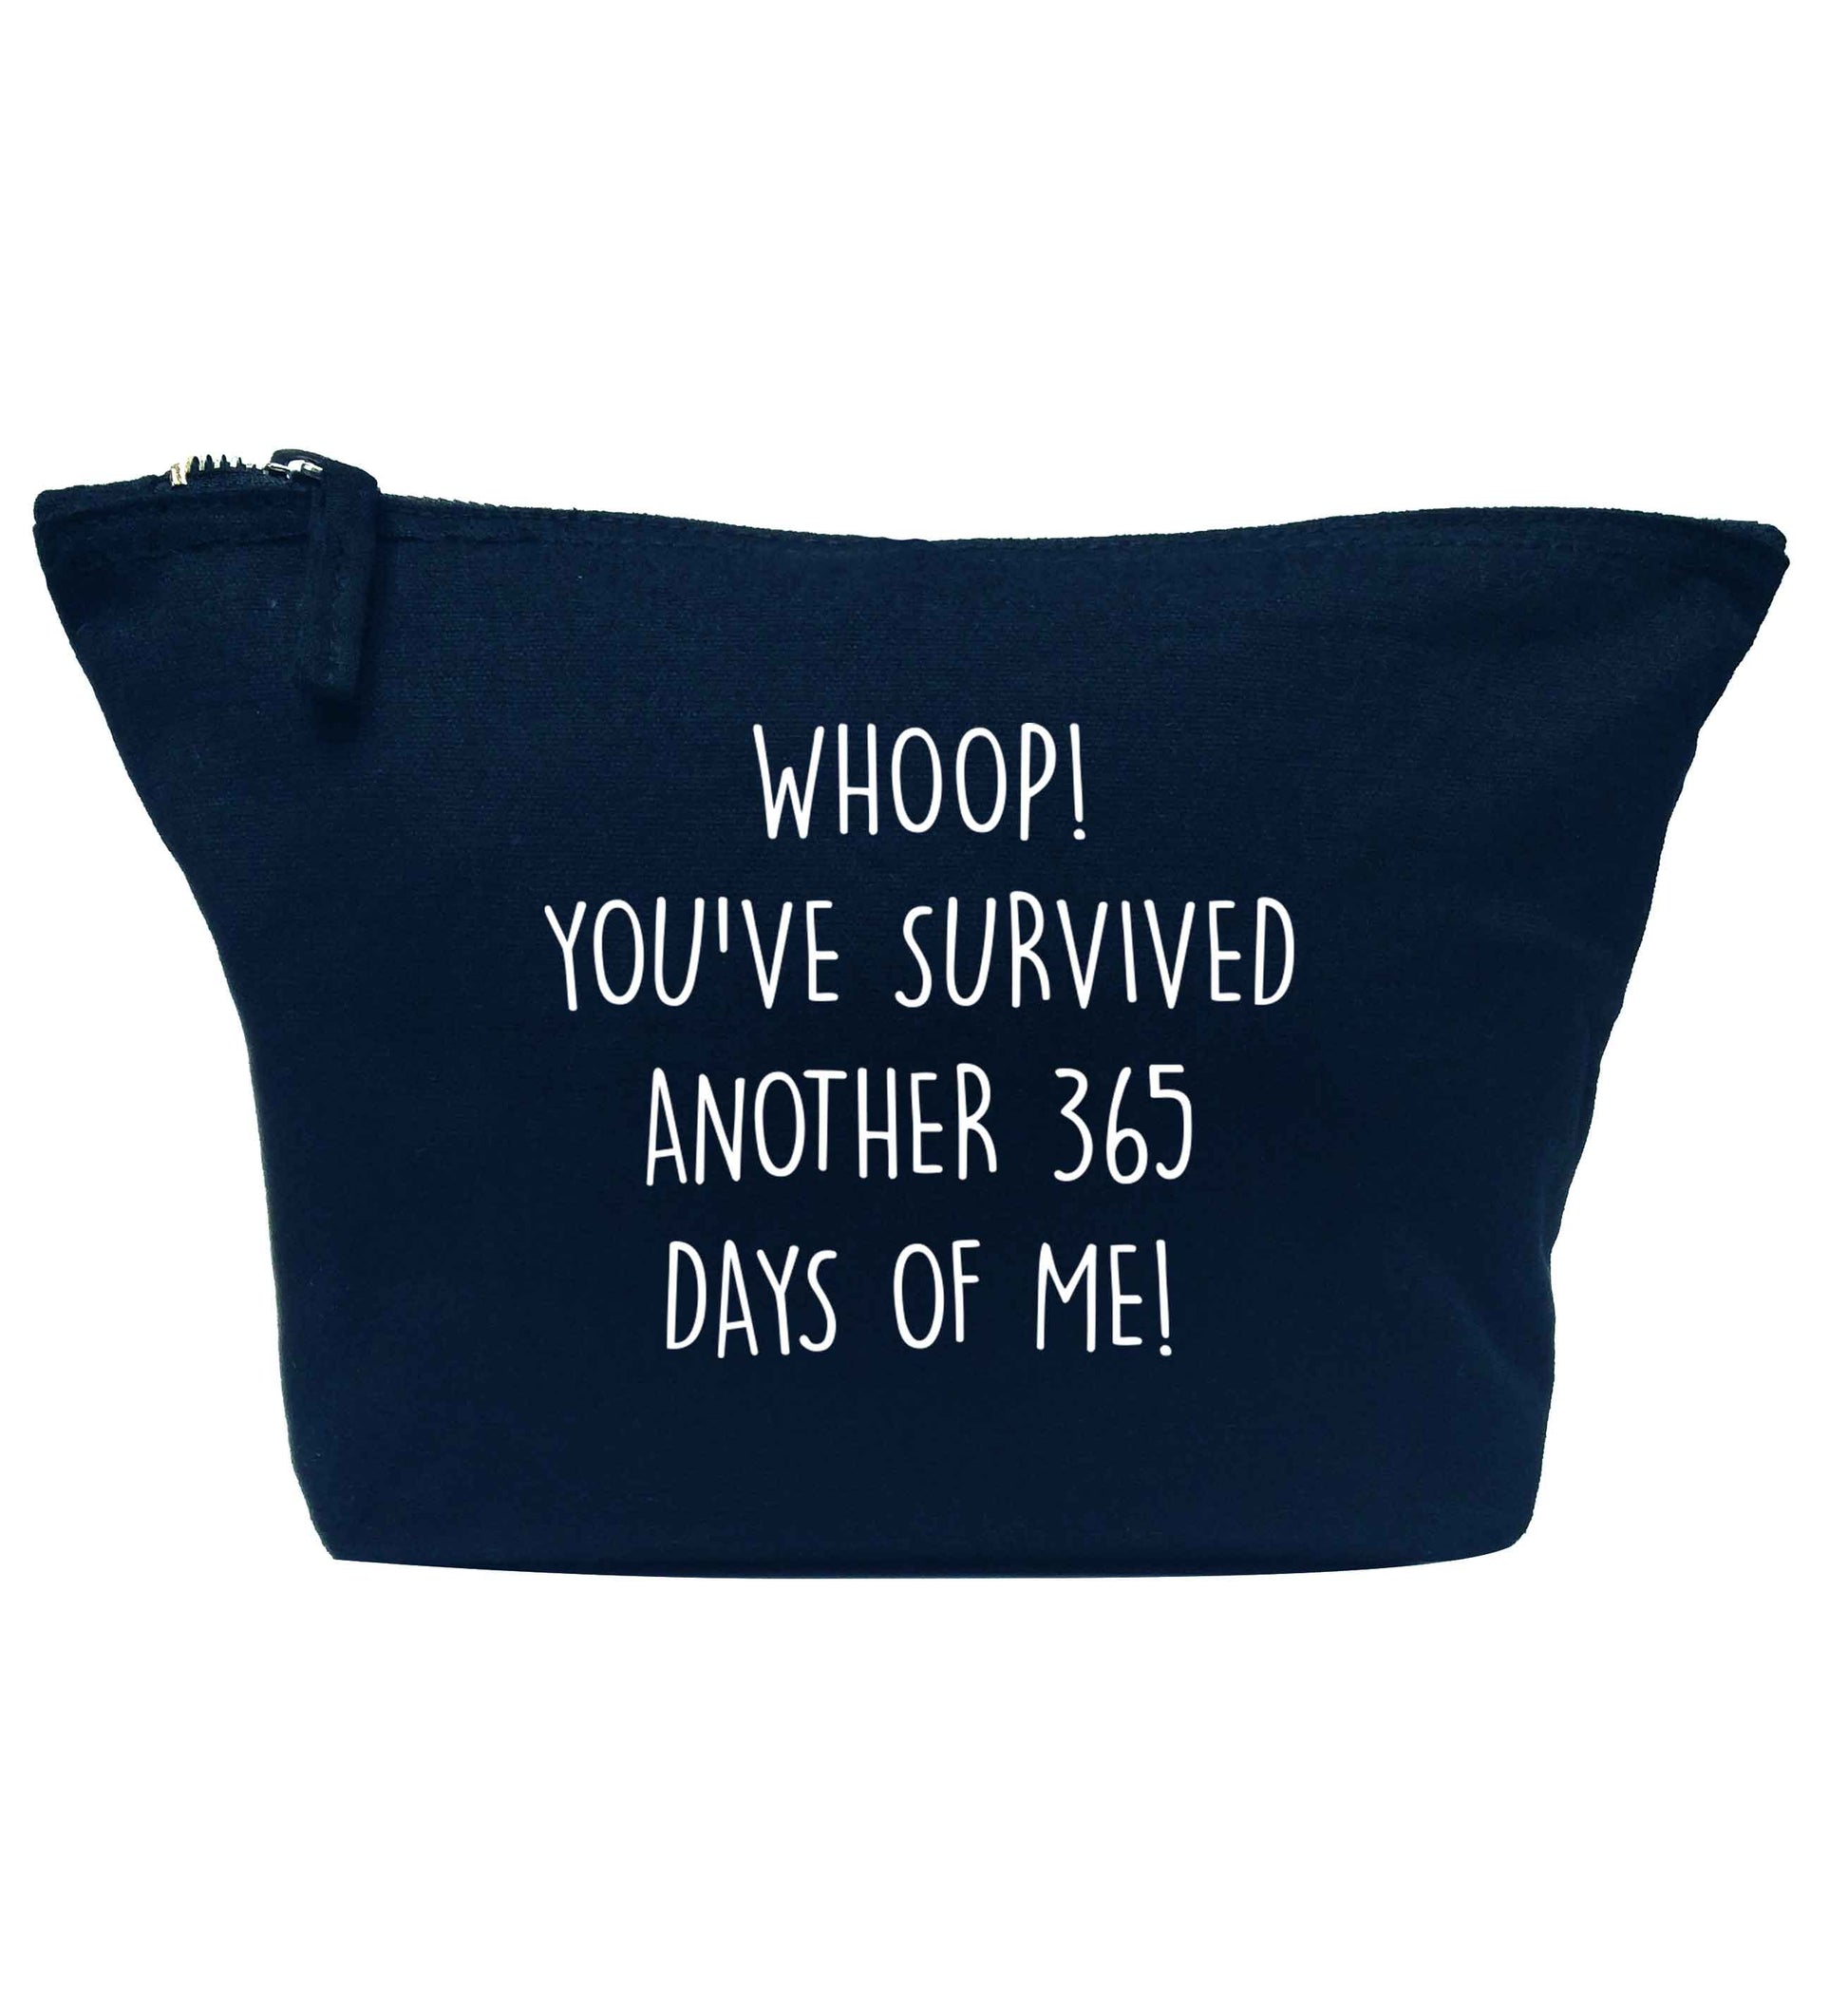 Whoop! You've survived another 365 days with me! navy makeup bag